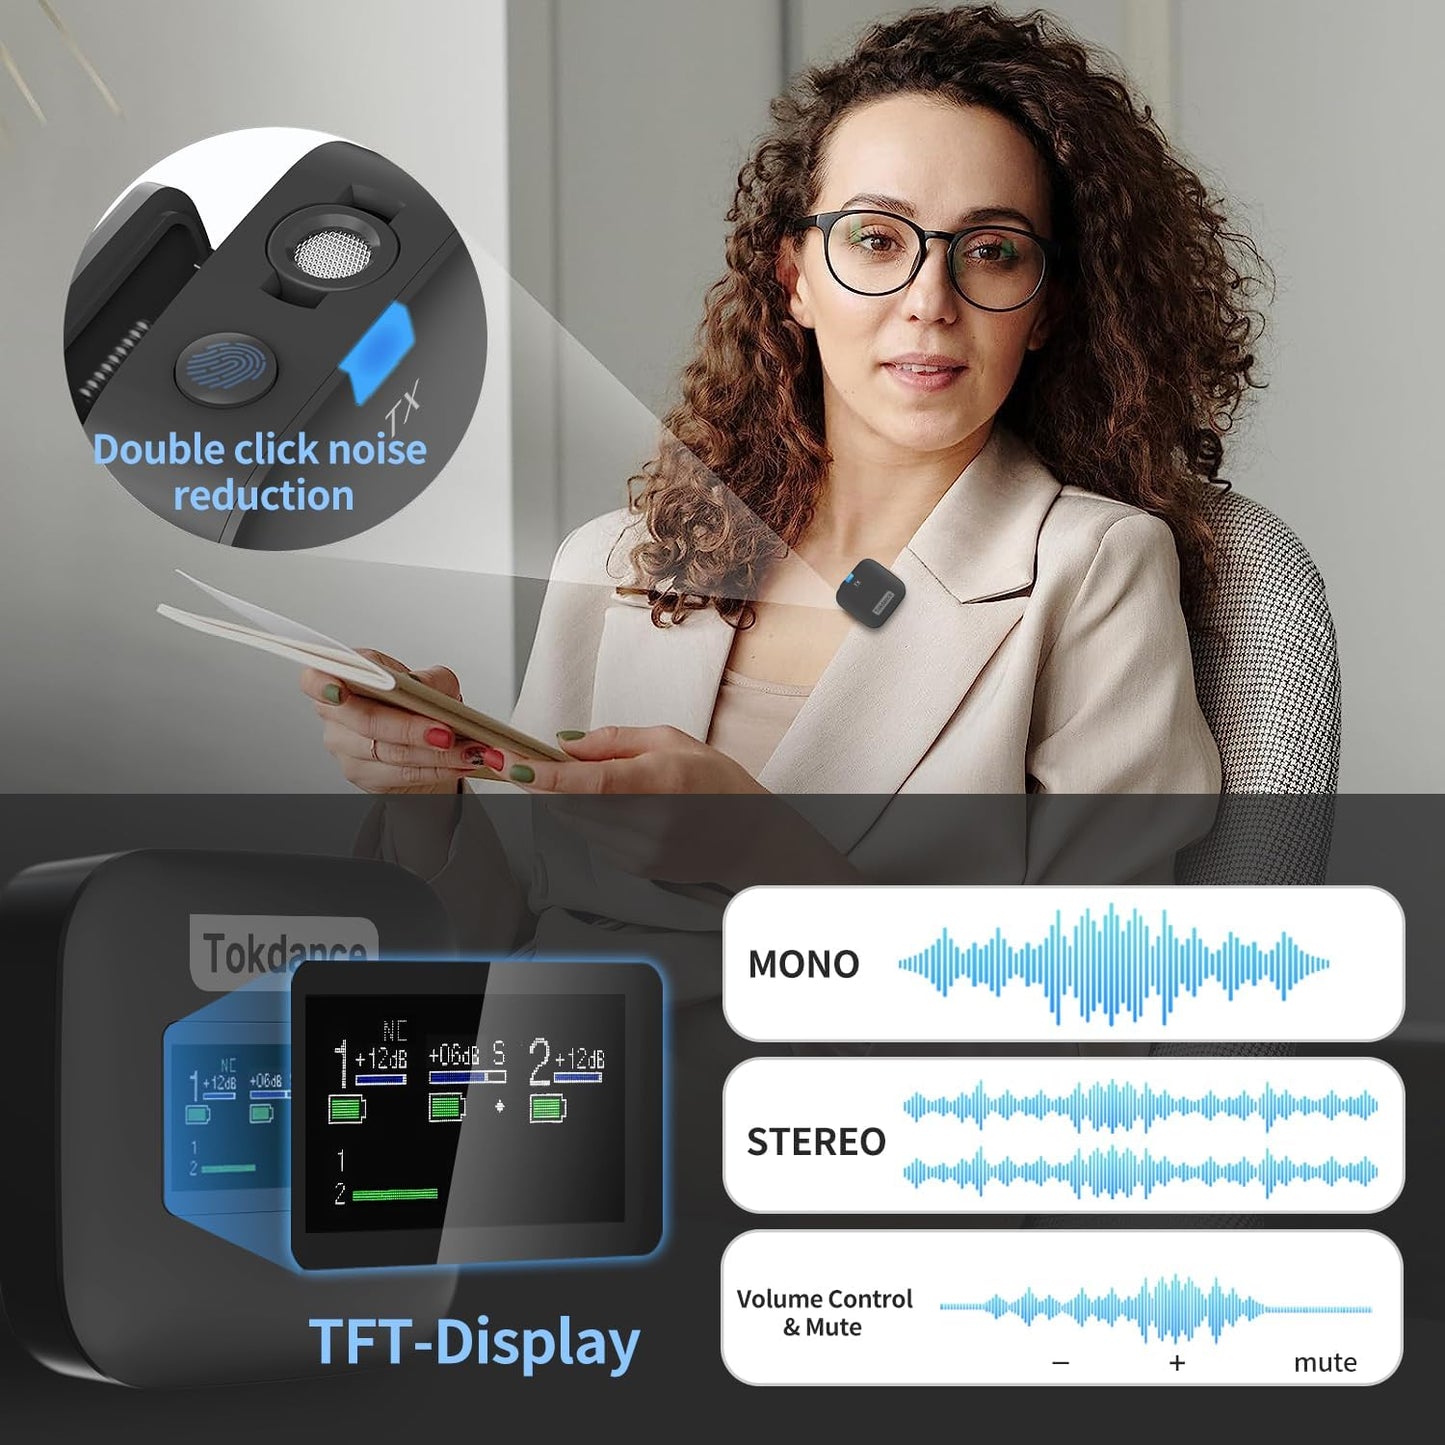 Tokdance 2 Pack Wireless Lavalier Microphone,Lossless Sound,Noise Cancellation,492 ft.(150m) Range,30H Battery,Lapel Mics for YouTube/Tiktok/Live Streaming/Vlog/iPhone/Camera/Android